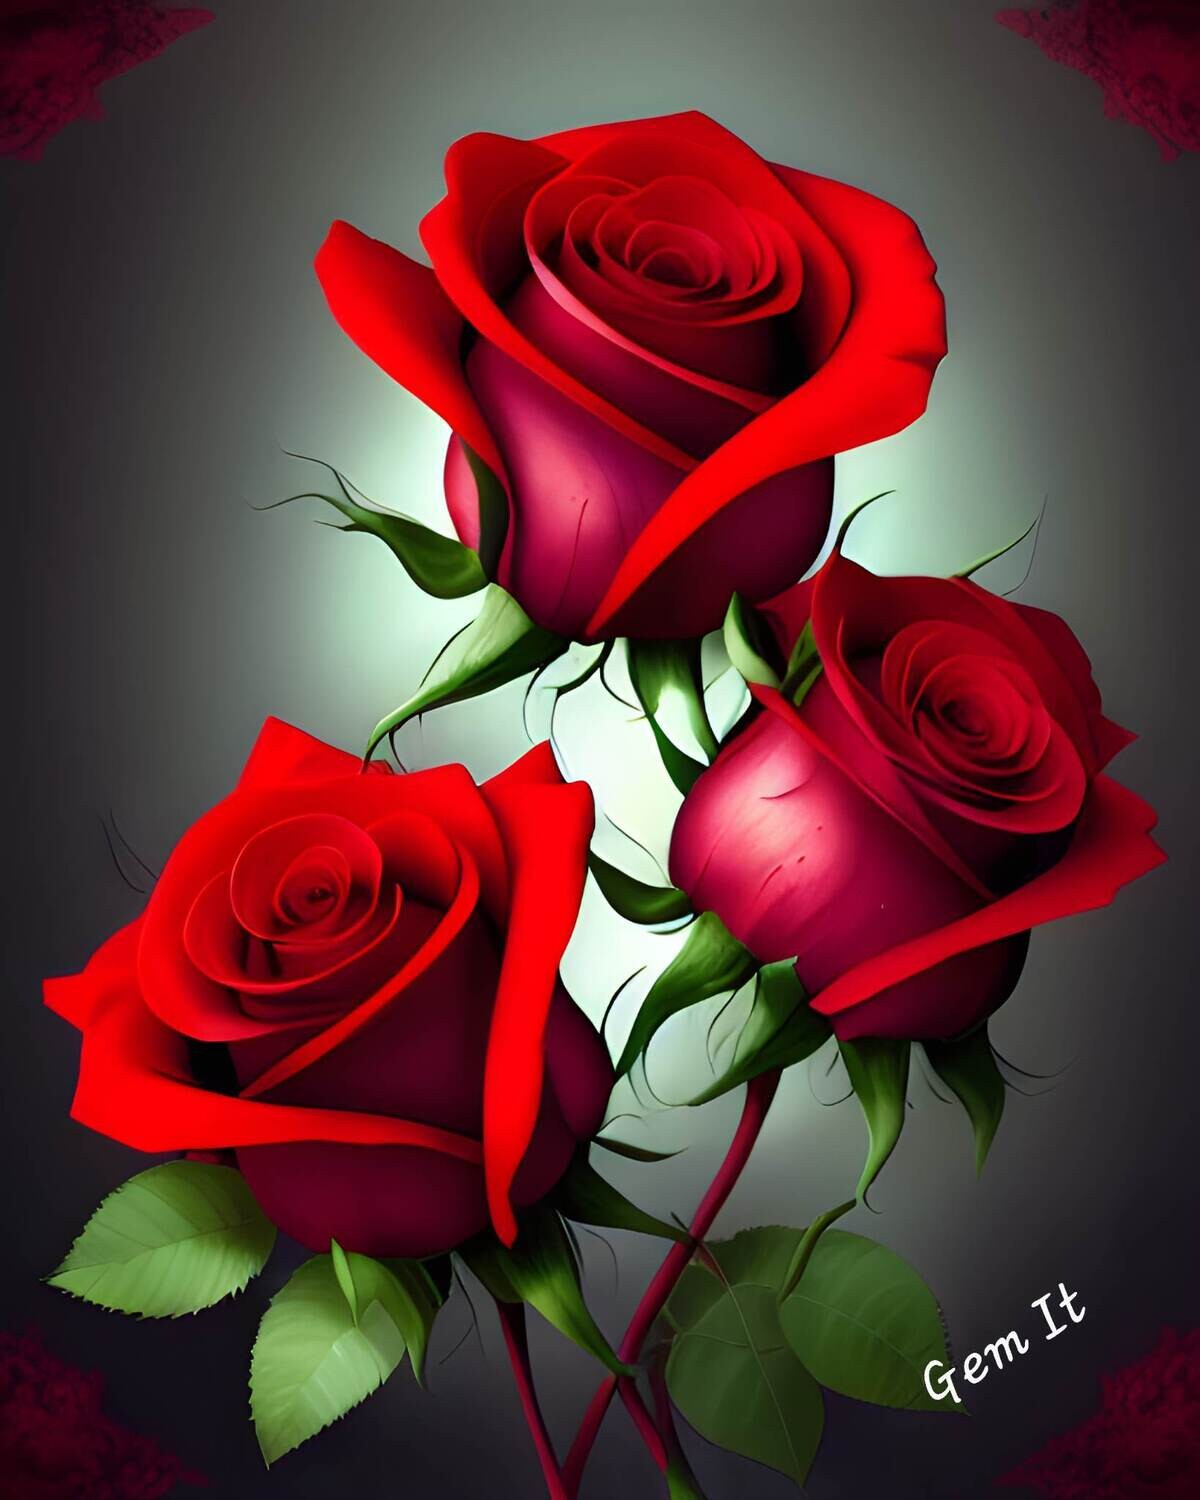 Roses Red 3 - Specially ordered for you. Delivery is approximately 4 - 6 weeks.